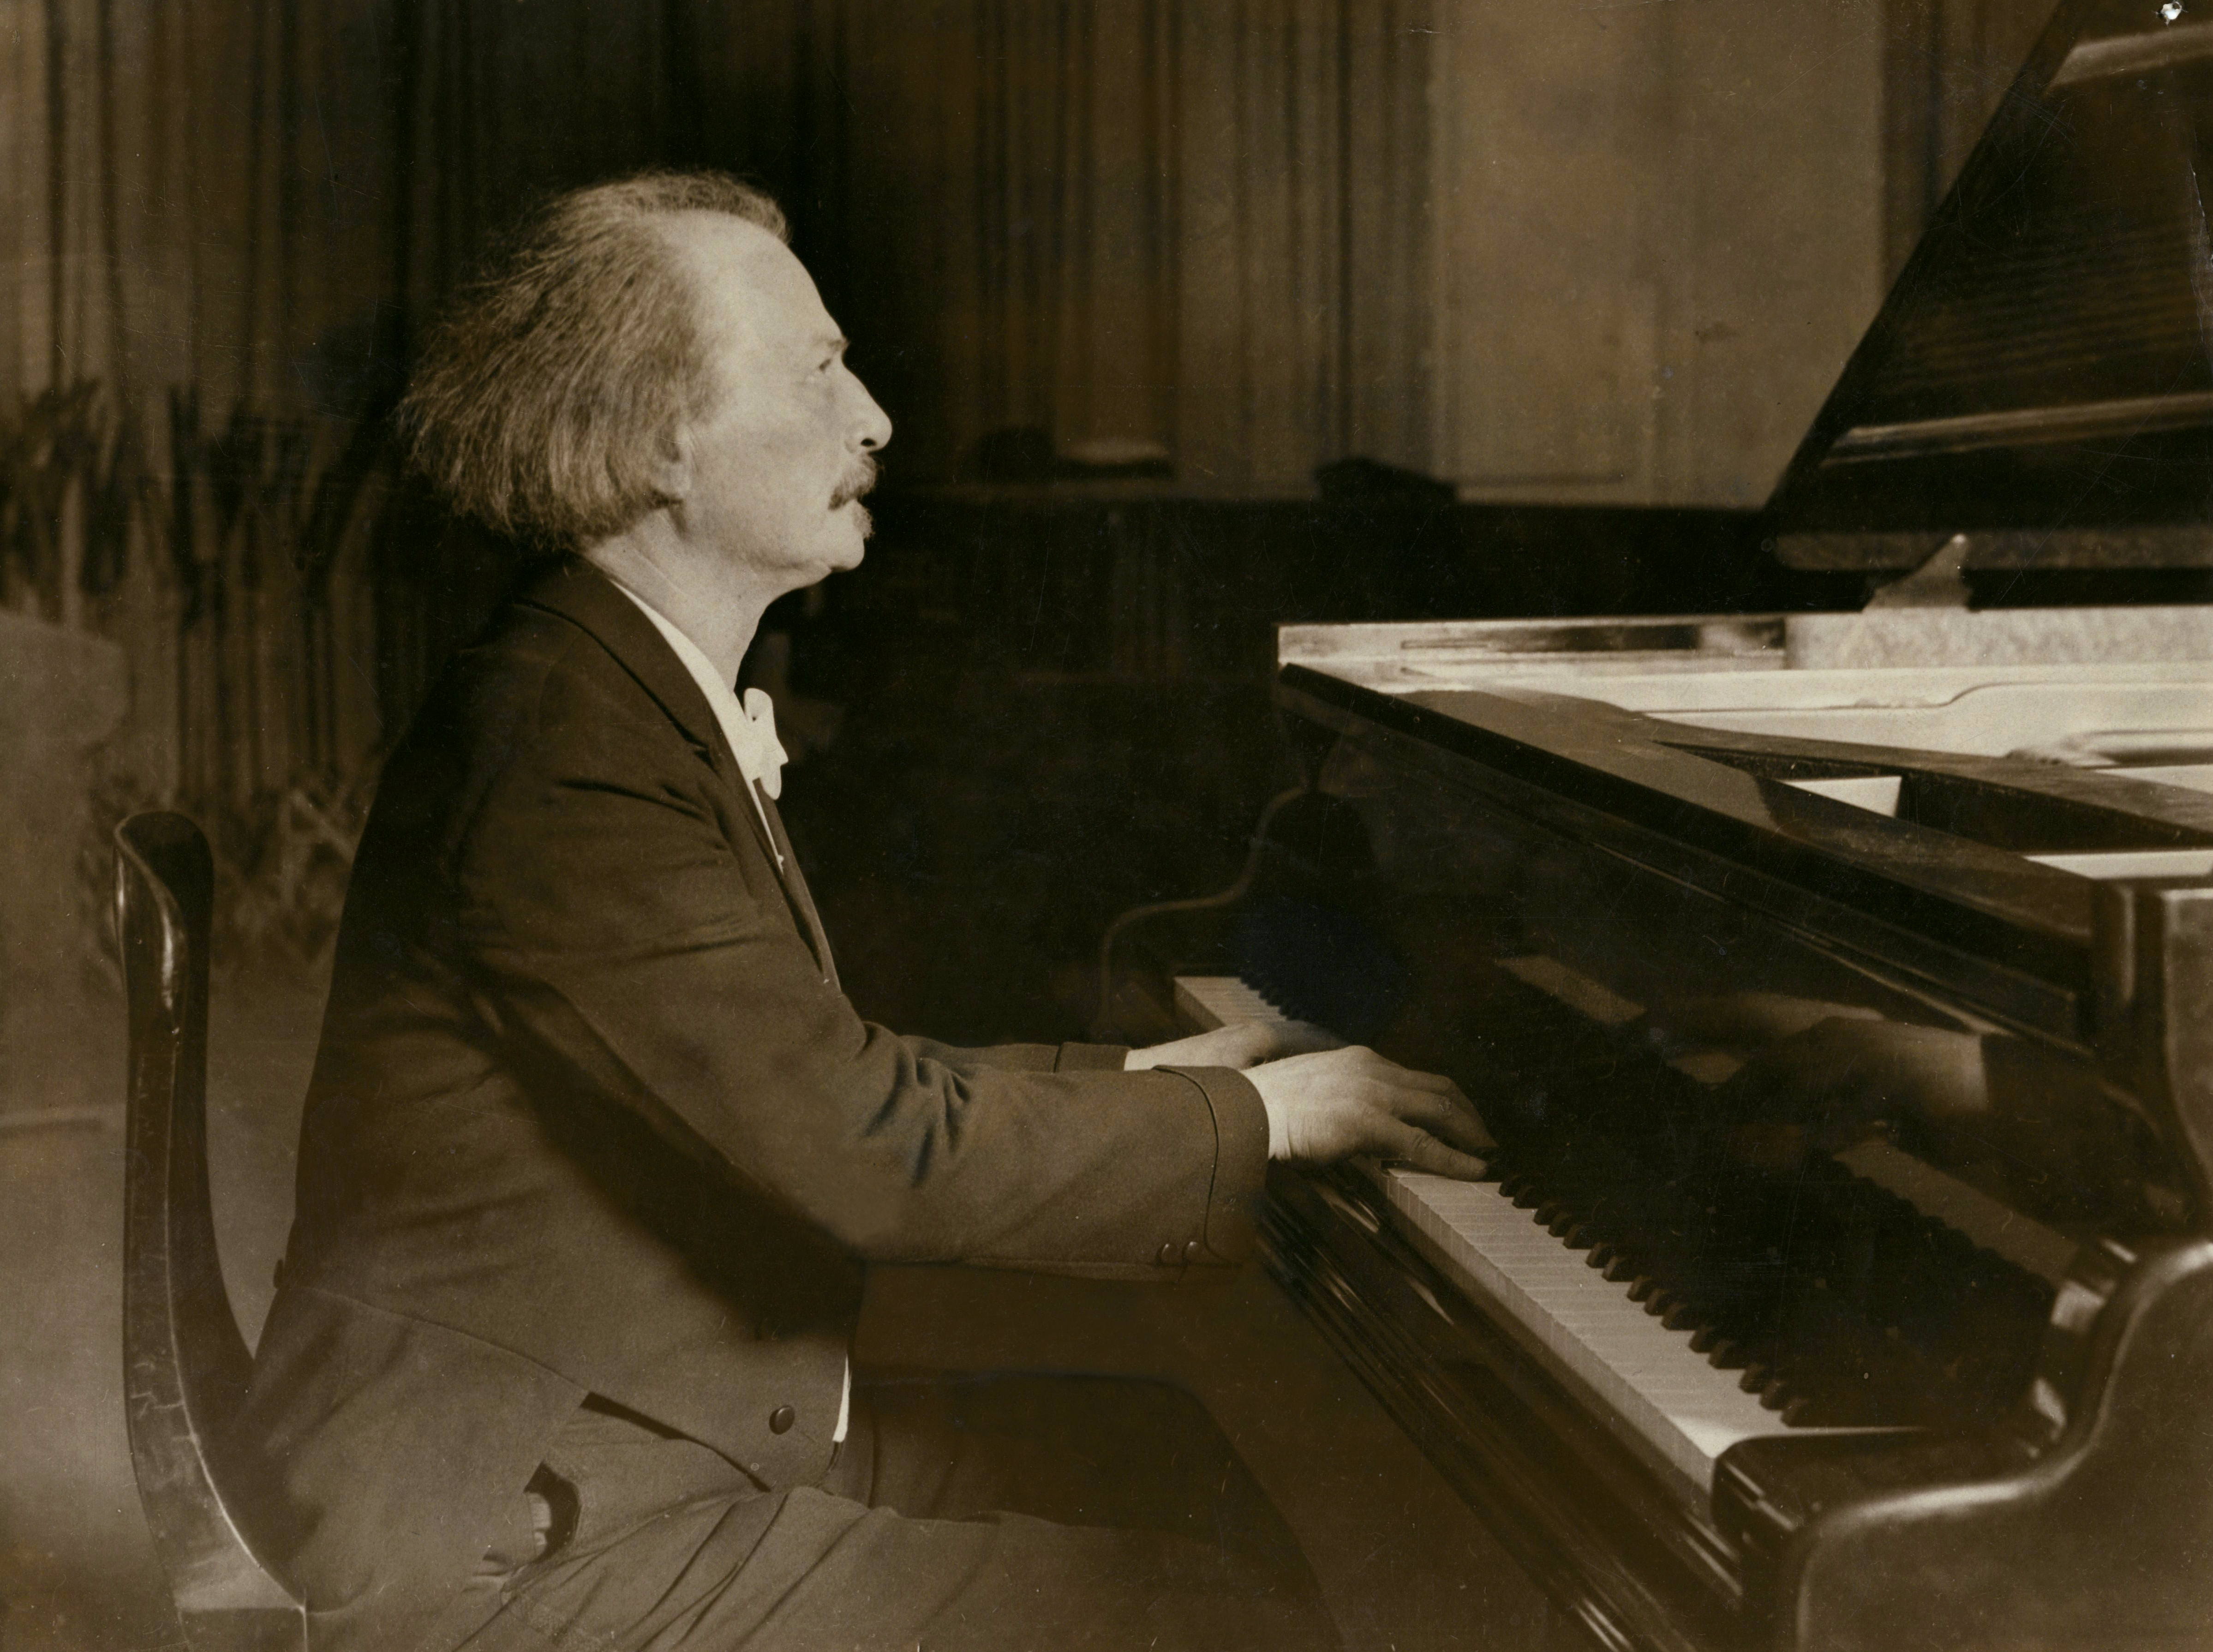 Ignacy Paderewski at the piano, photographed in London in 1926